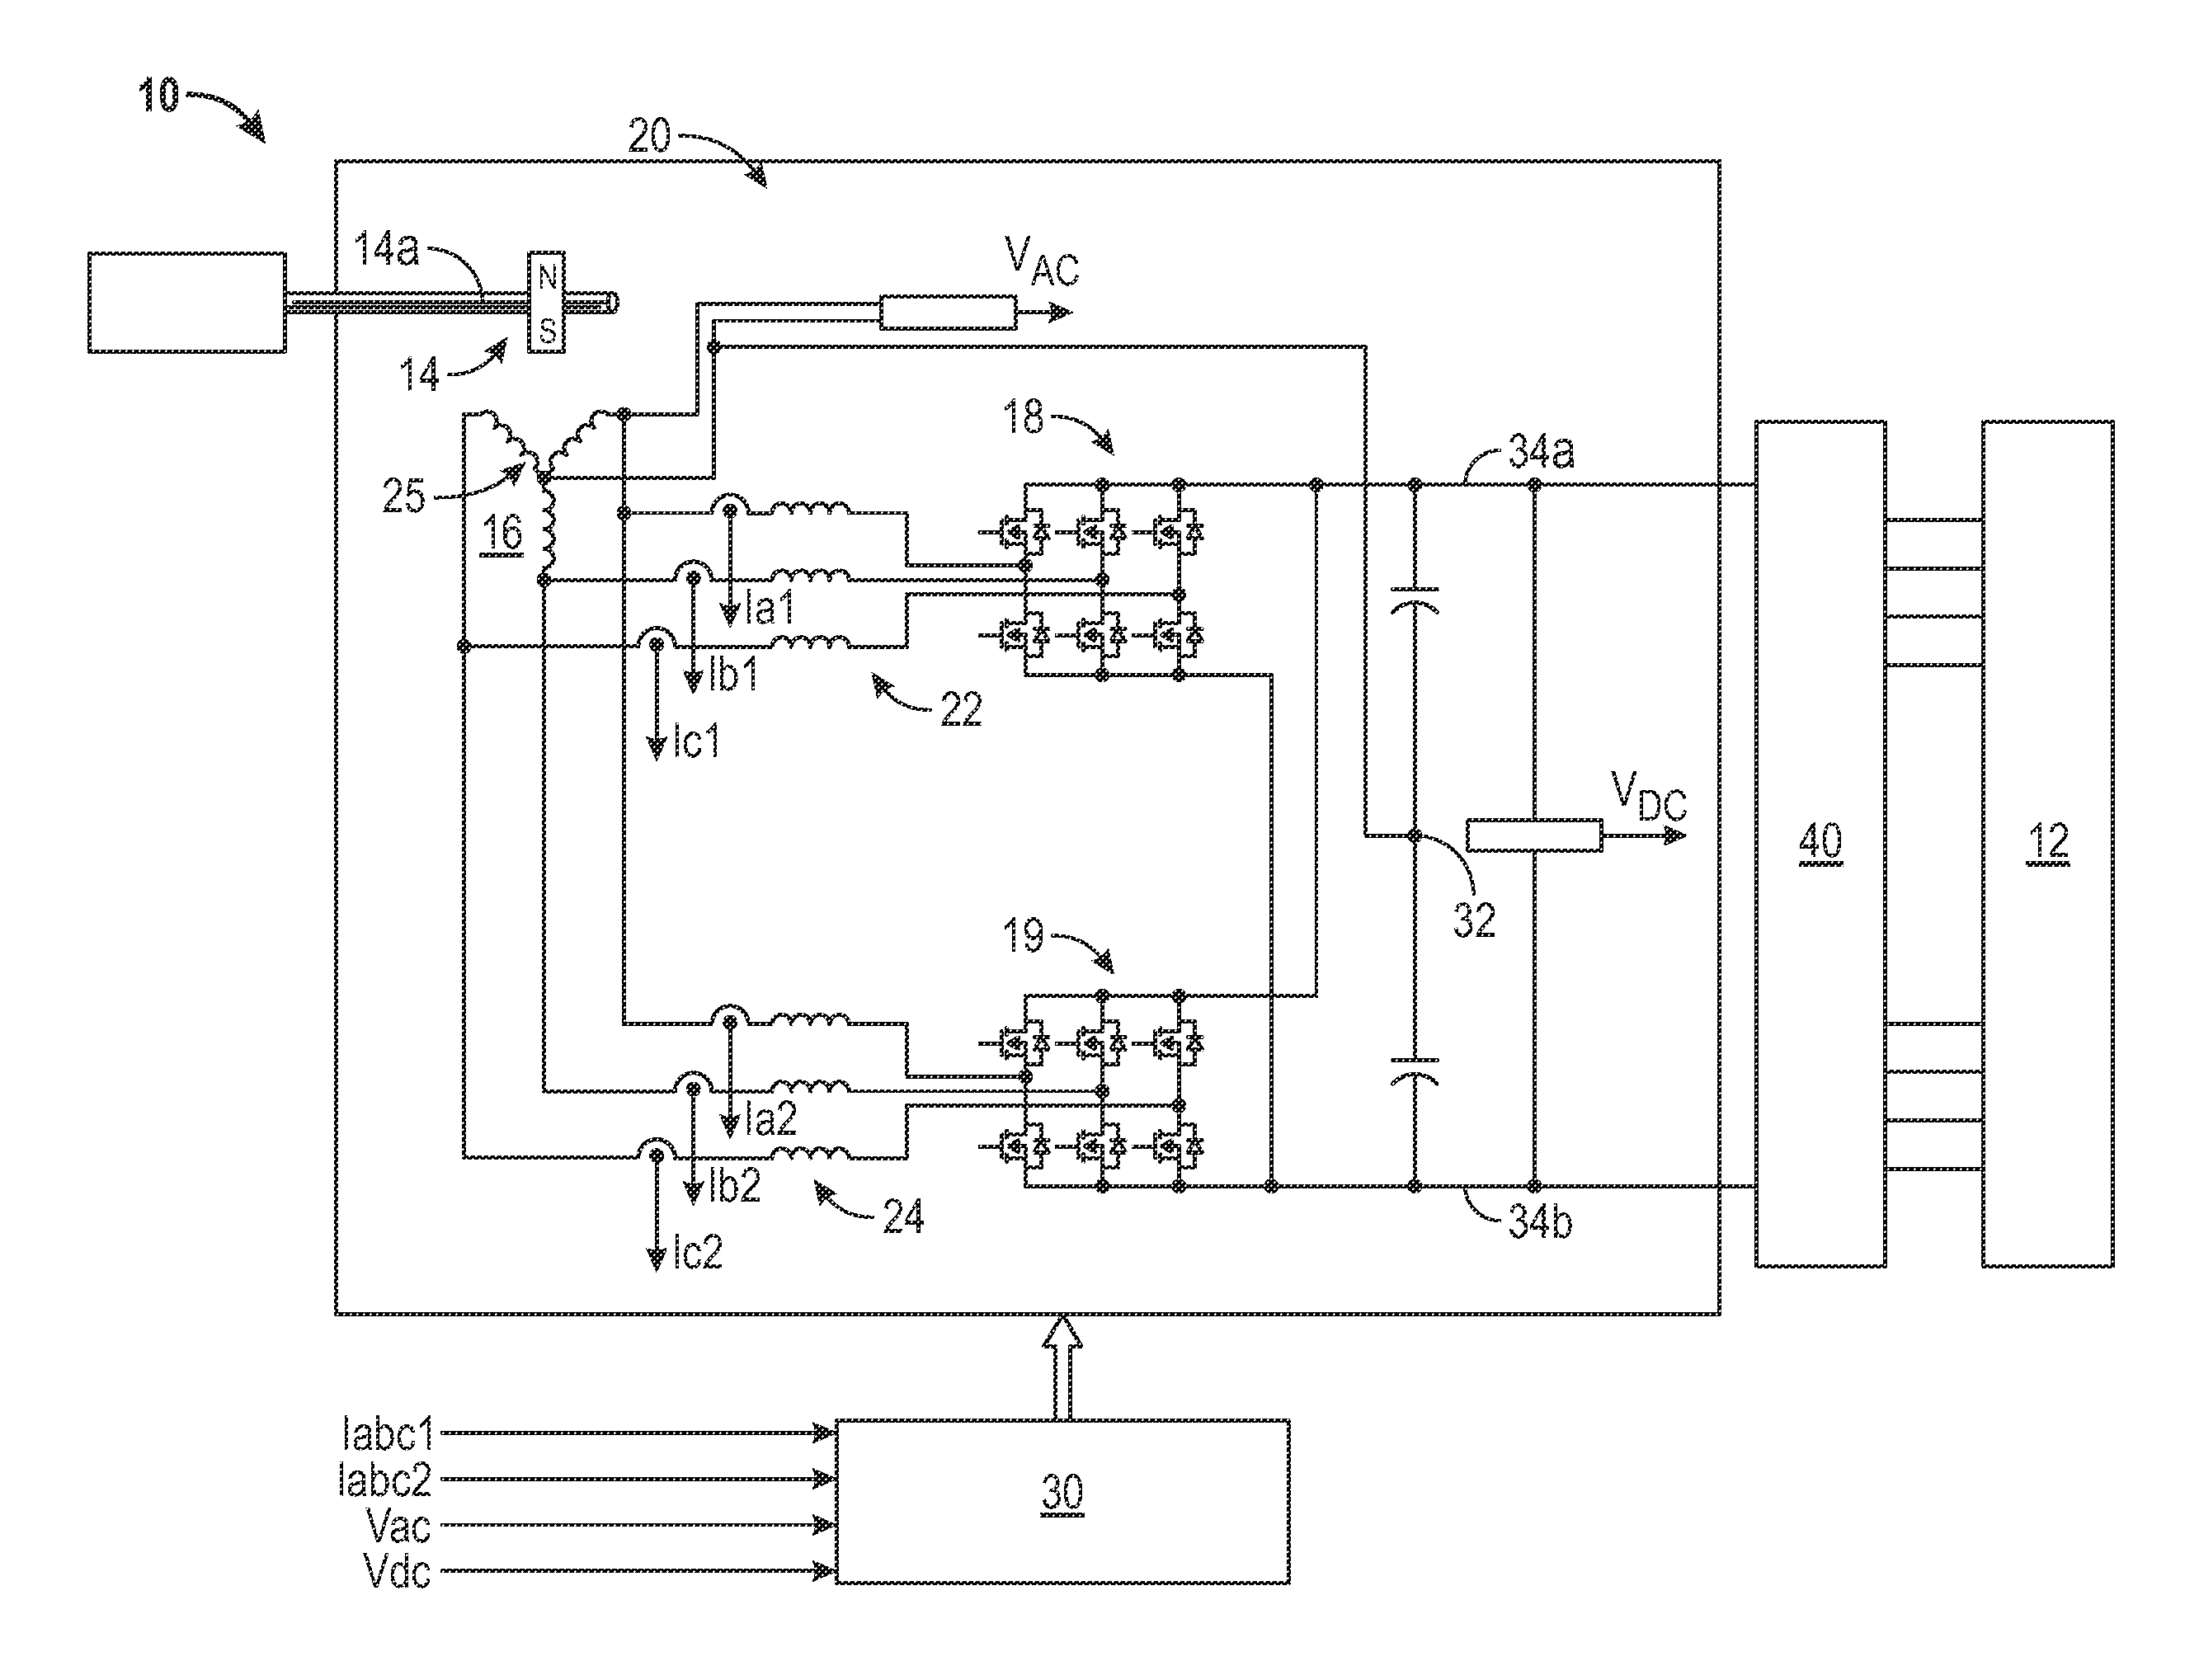 Integrated high-voltage direct current electric power generating system